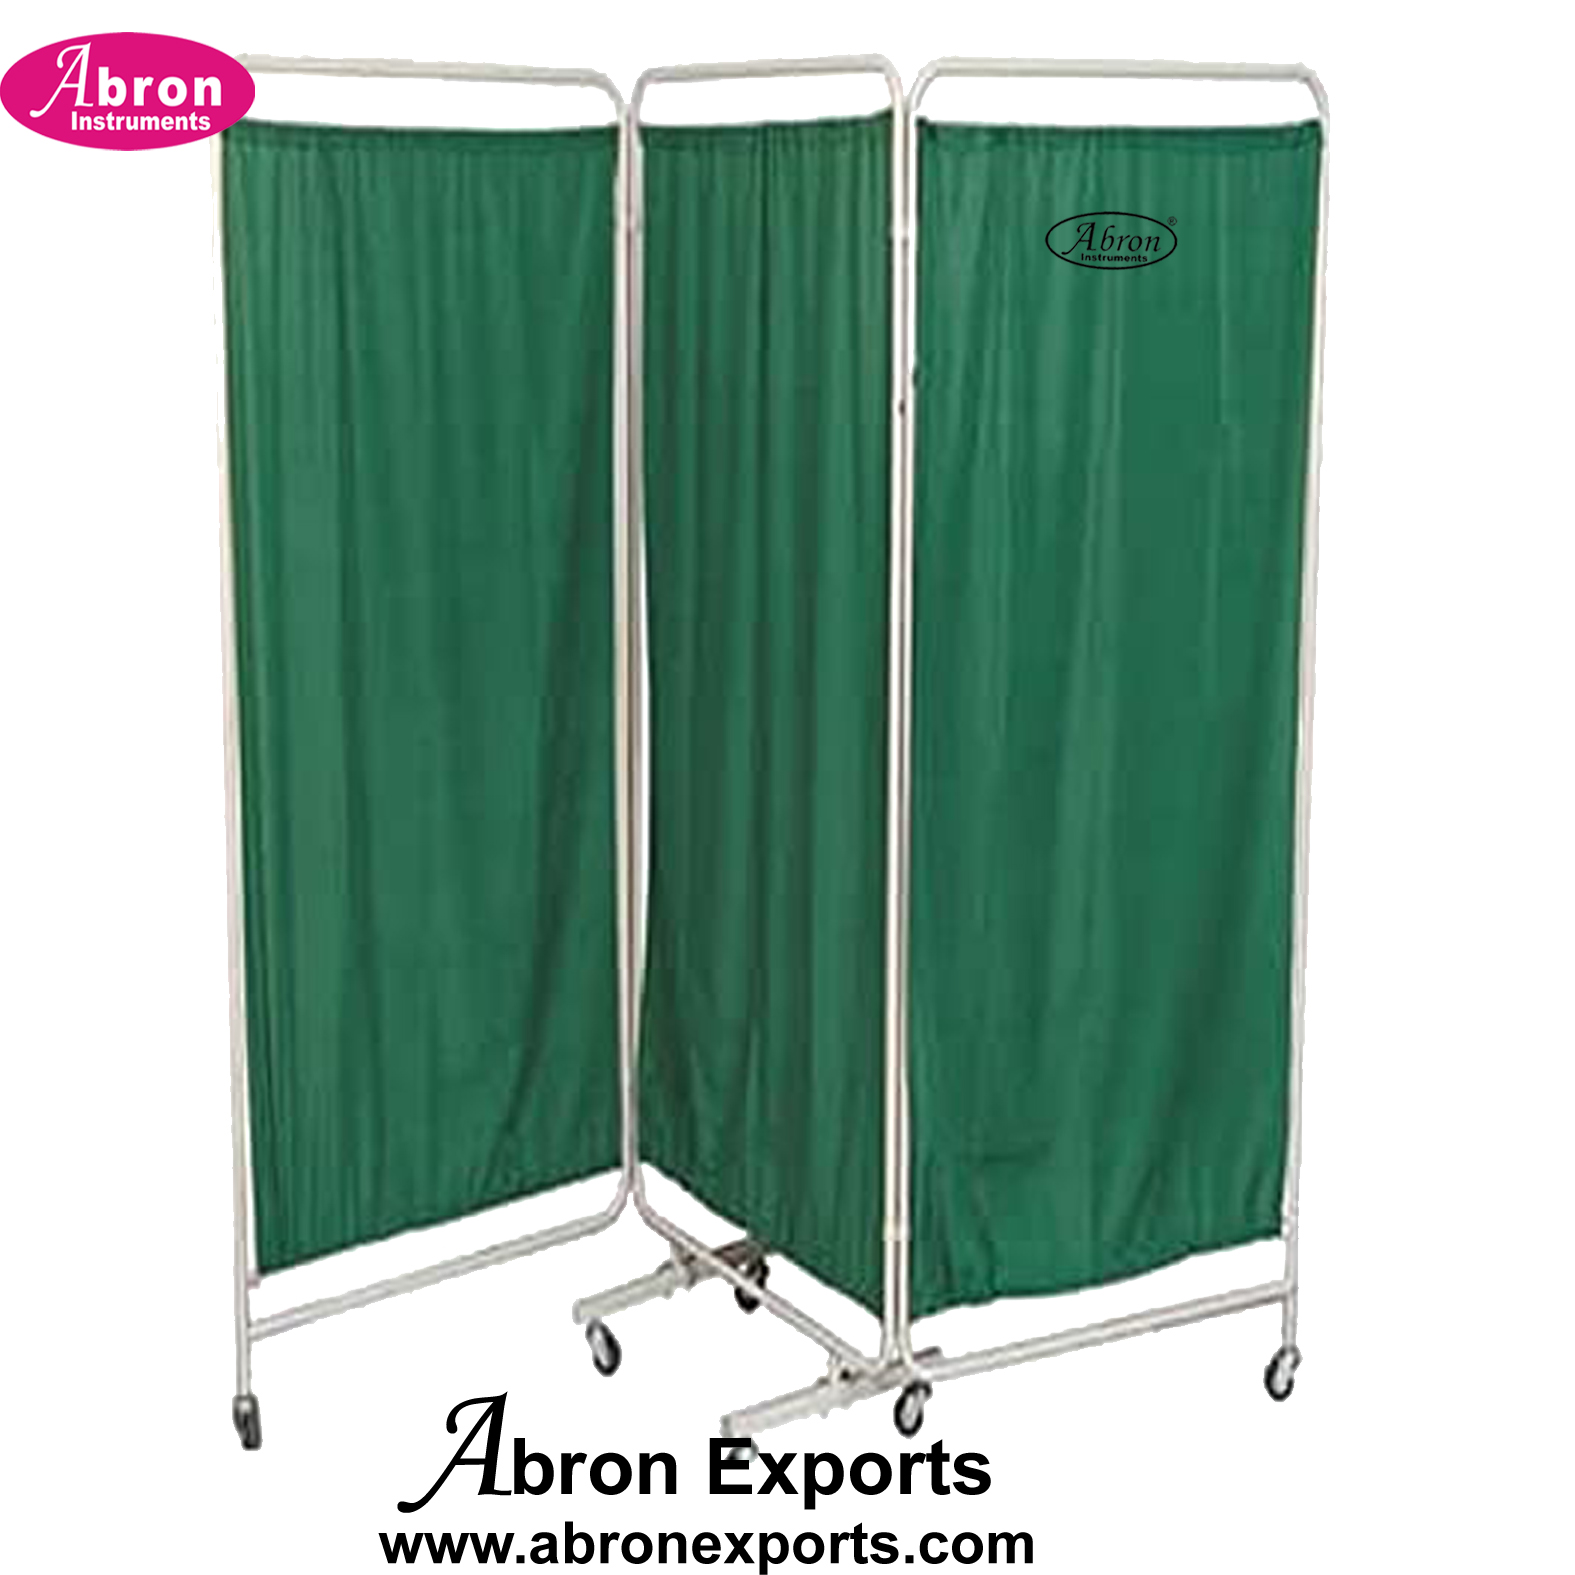 Hospital Medical bedside screens 3 four x2 feet partion with curtons steel frame with wheels Abron ABM-2355-S3P 